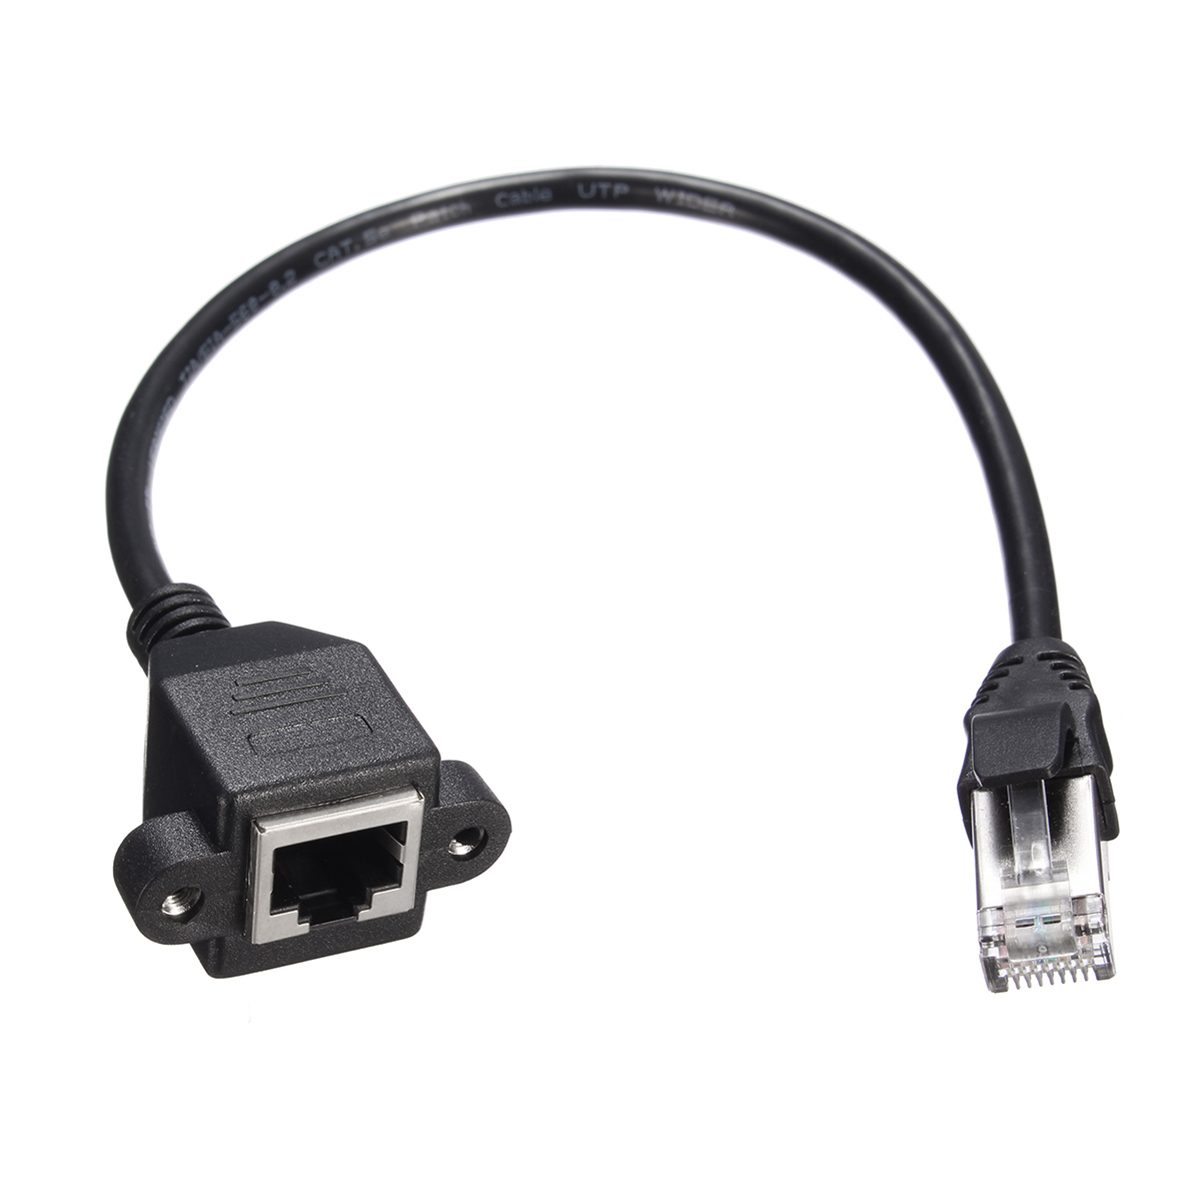 30cm/1M RJ45 Cable Male to Female Screw Panel Mount Ethernet LAN Network Extension Cable 53